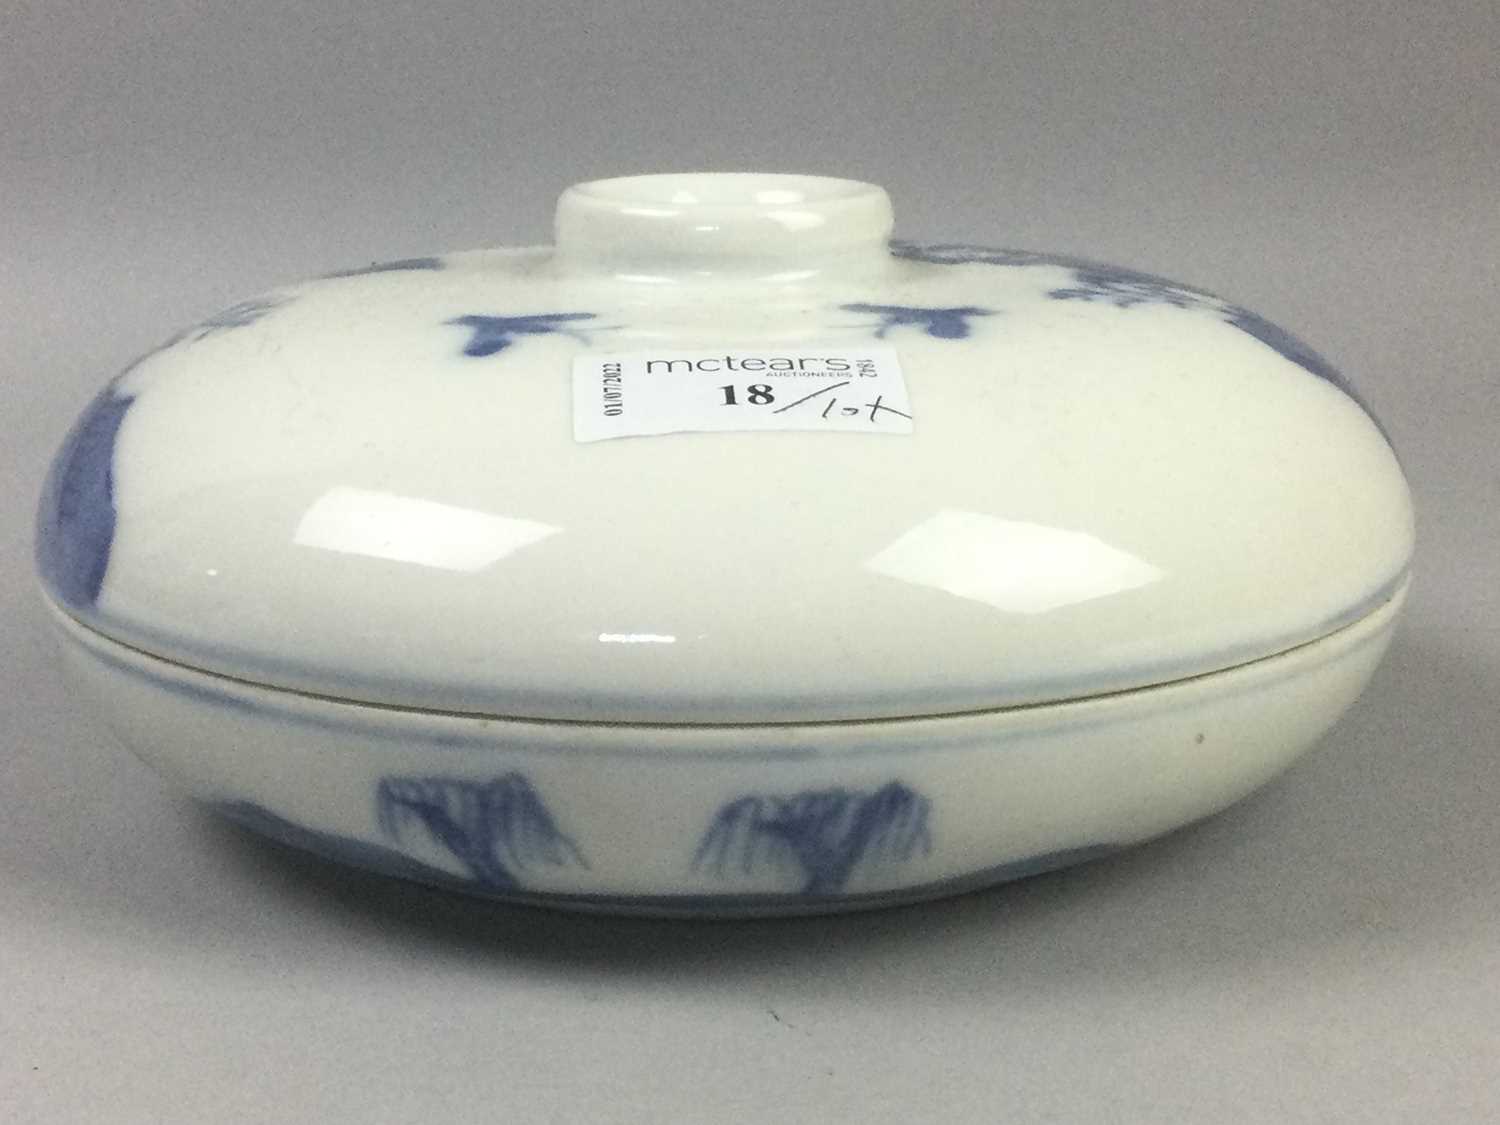 Lot 18 - A CHINESE BLUE & WHITE JAR AND COVER AND OTHER CERAMICS